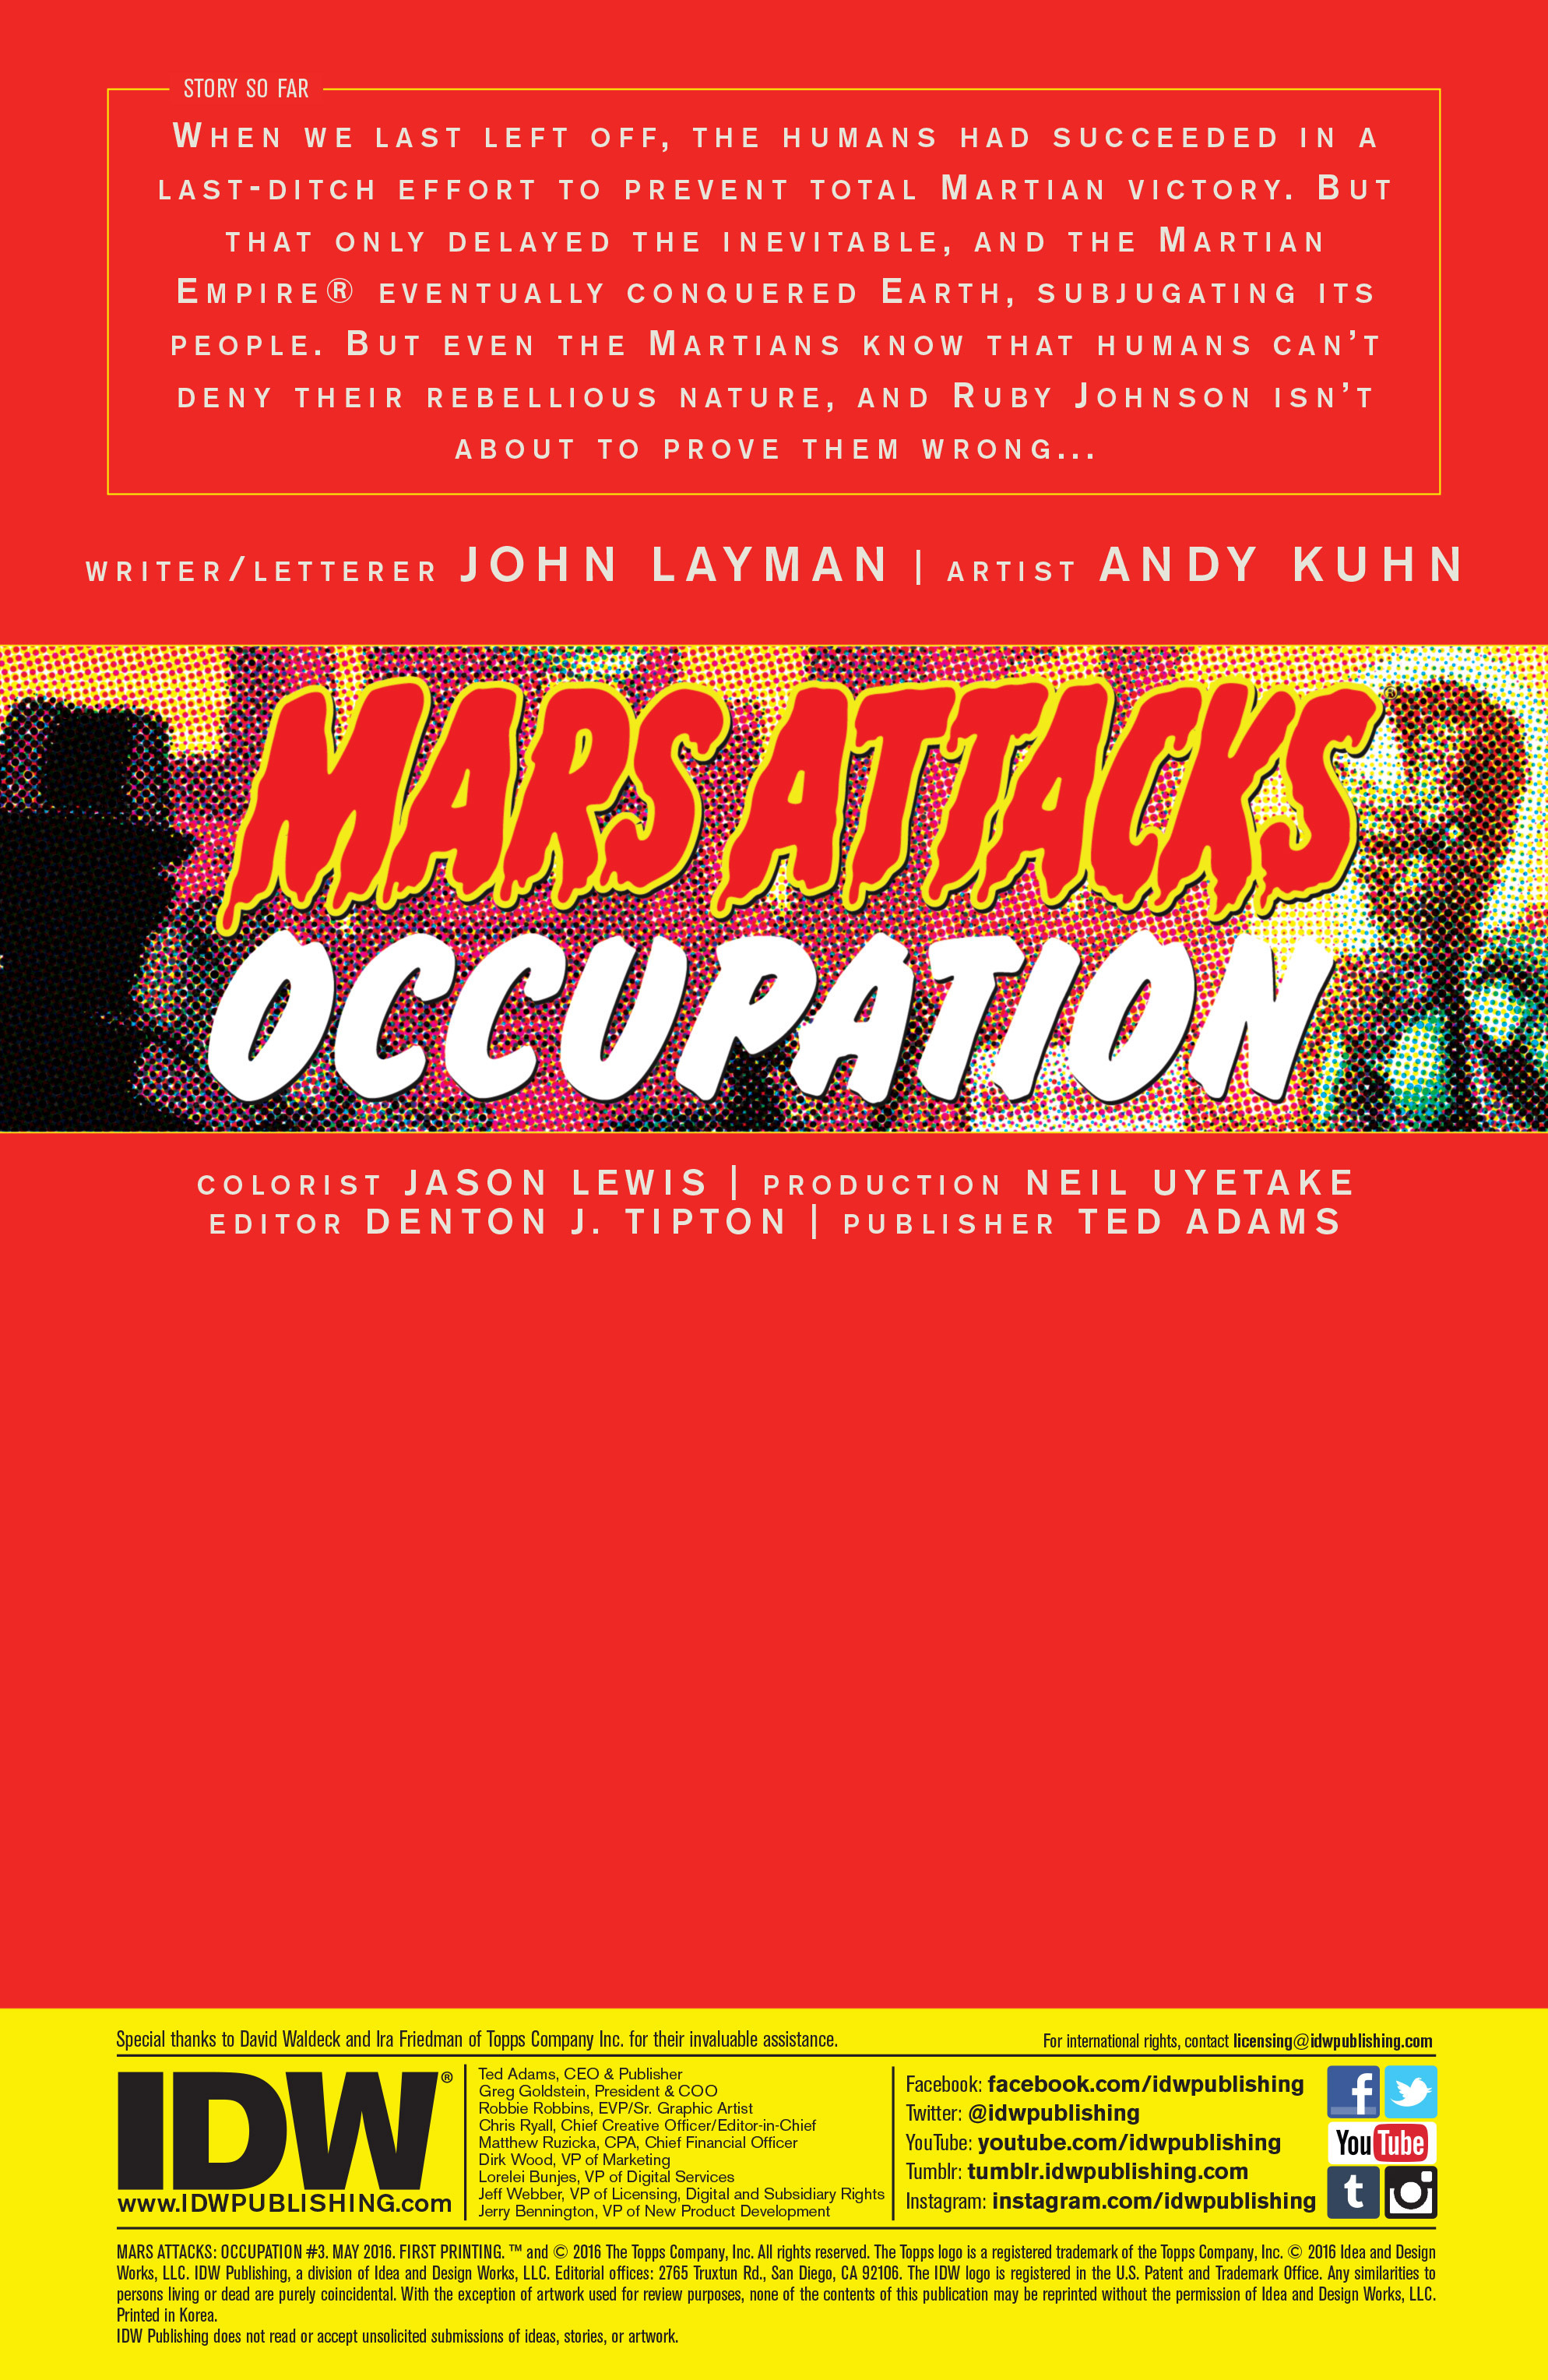 Read online Mars Attacks: Occupation comic -  Issue #3 - 2